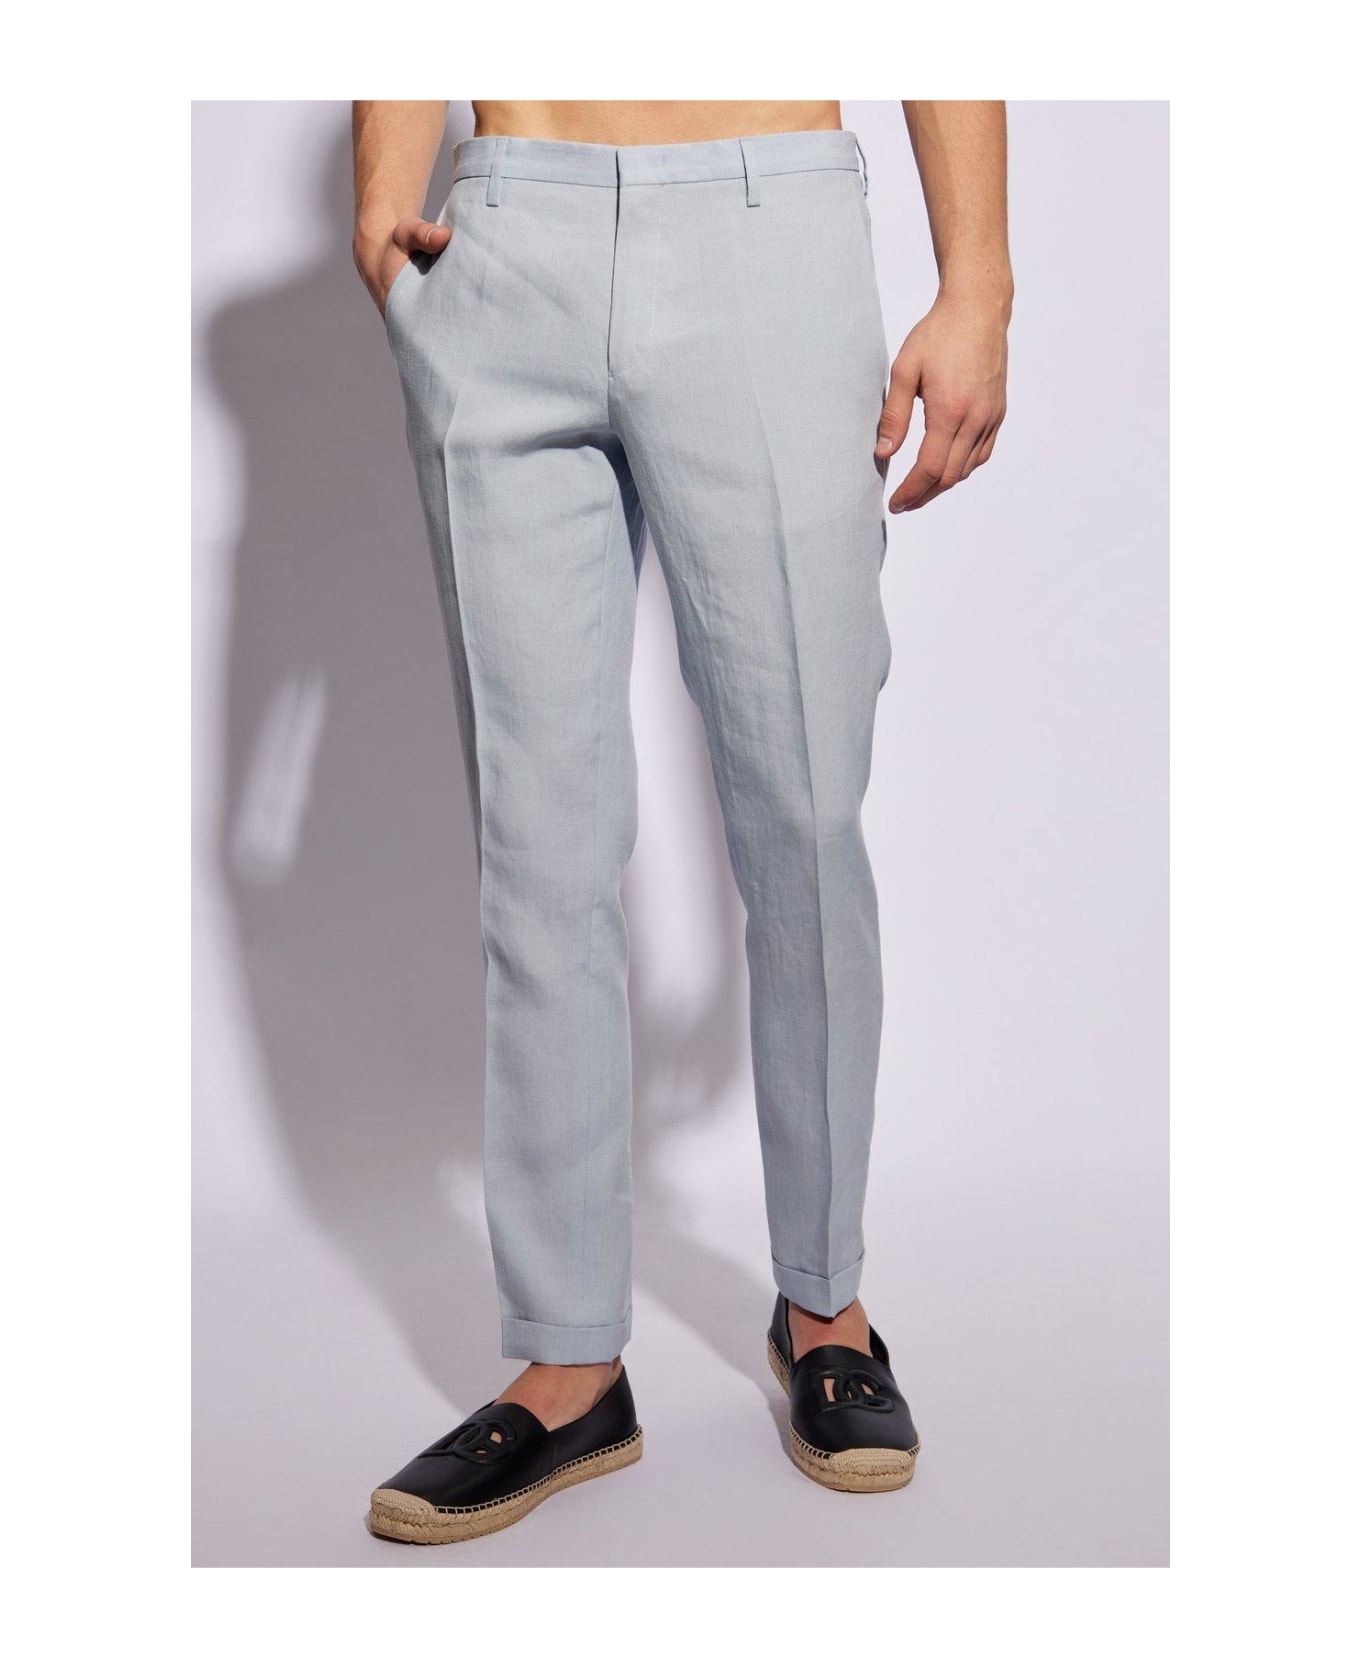 Paul Smith Linen Pleat Front Trousers - LIGHT BLUE ボトムス